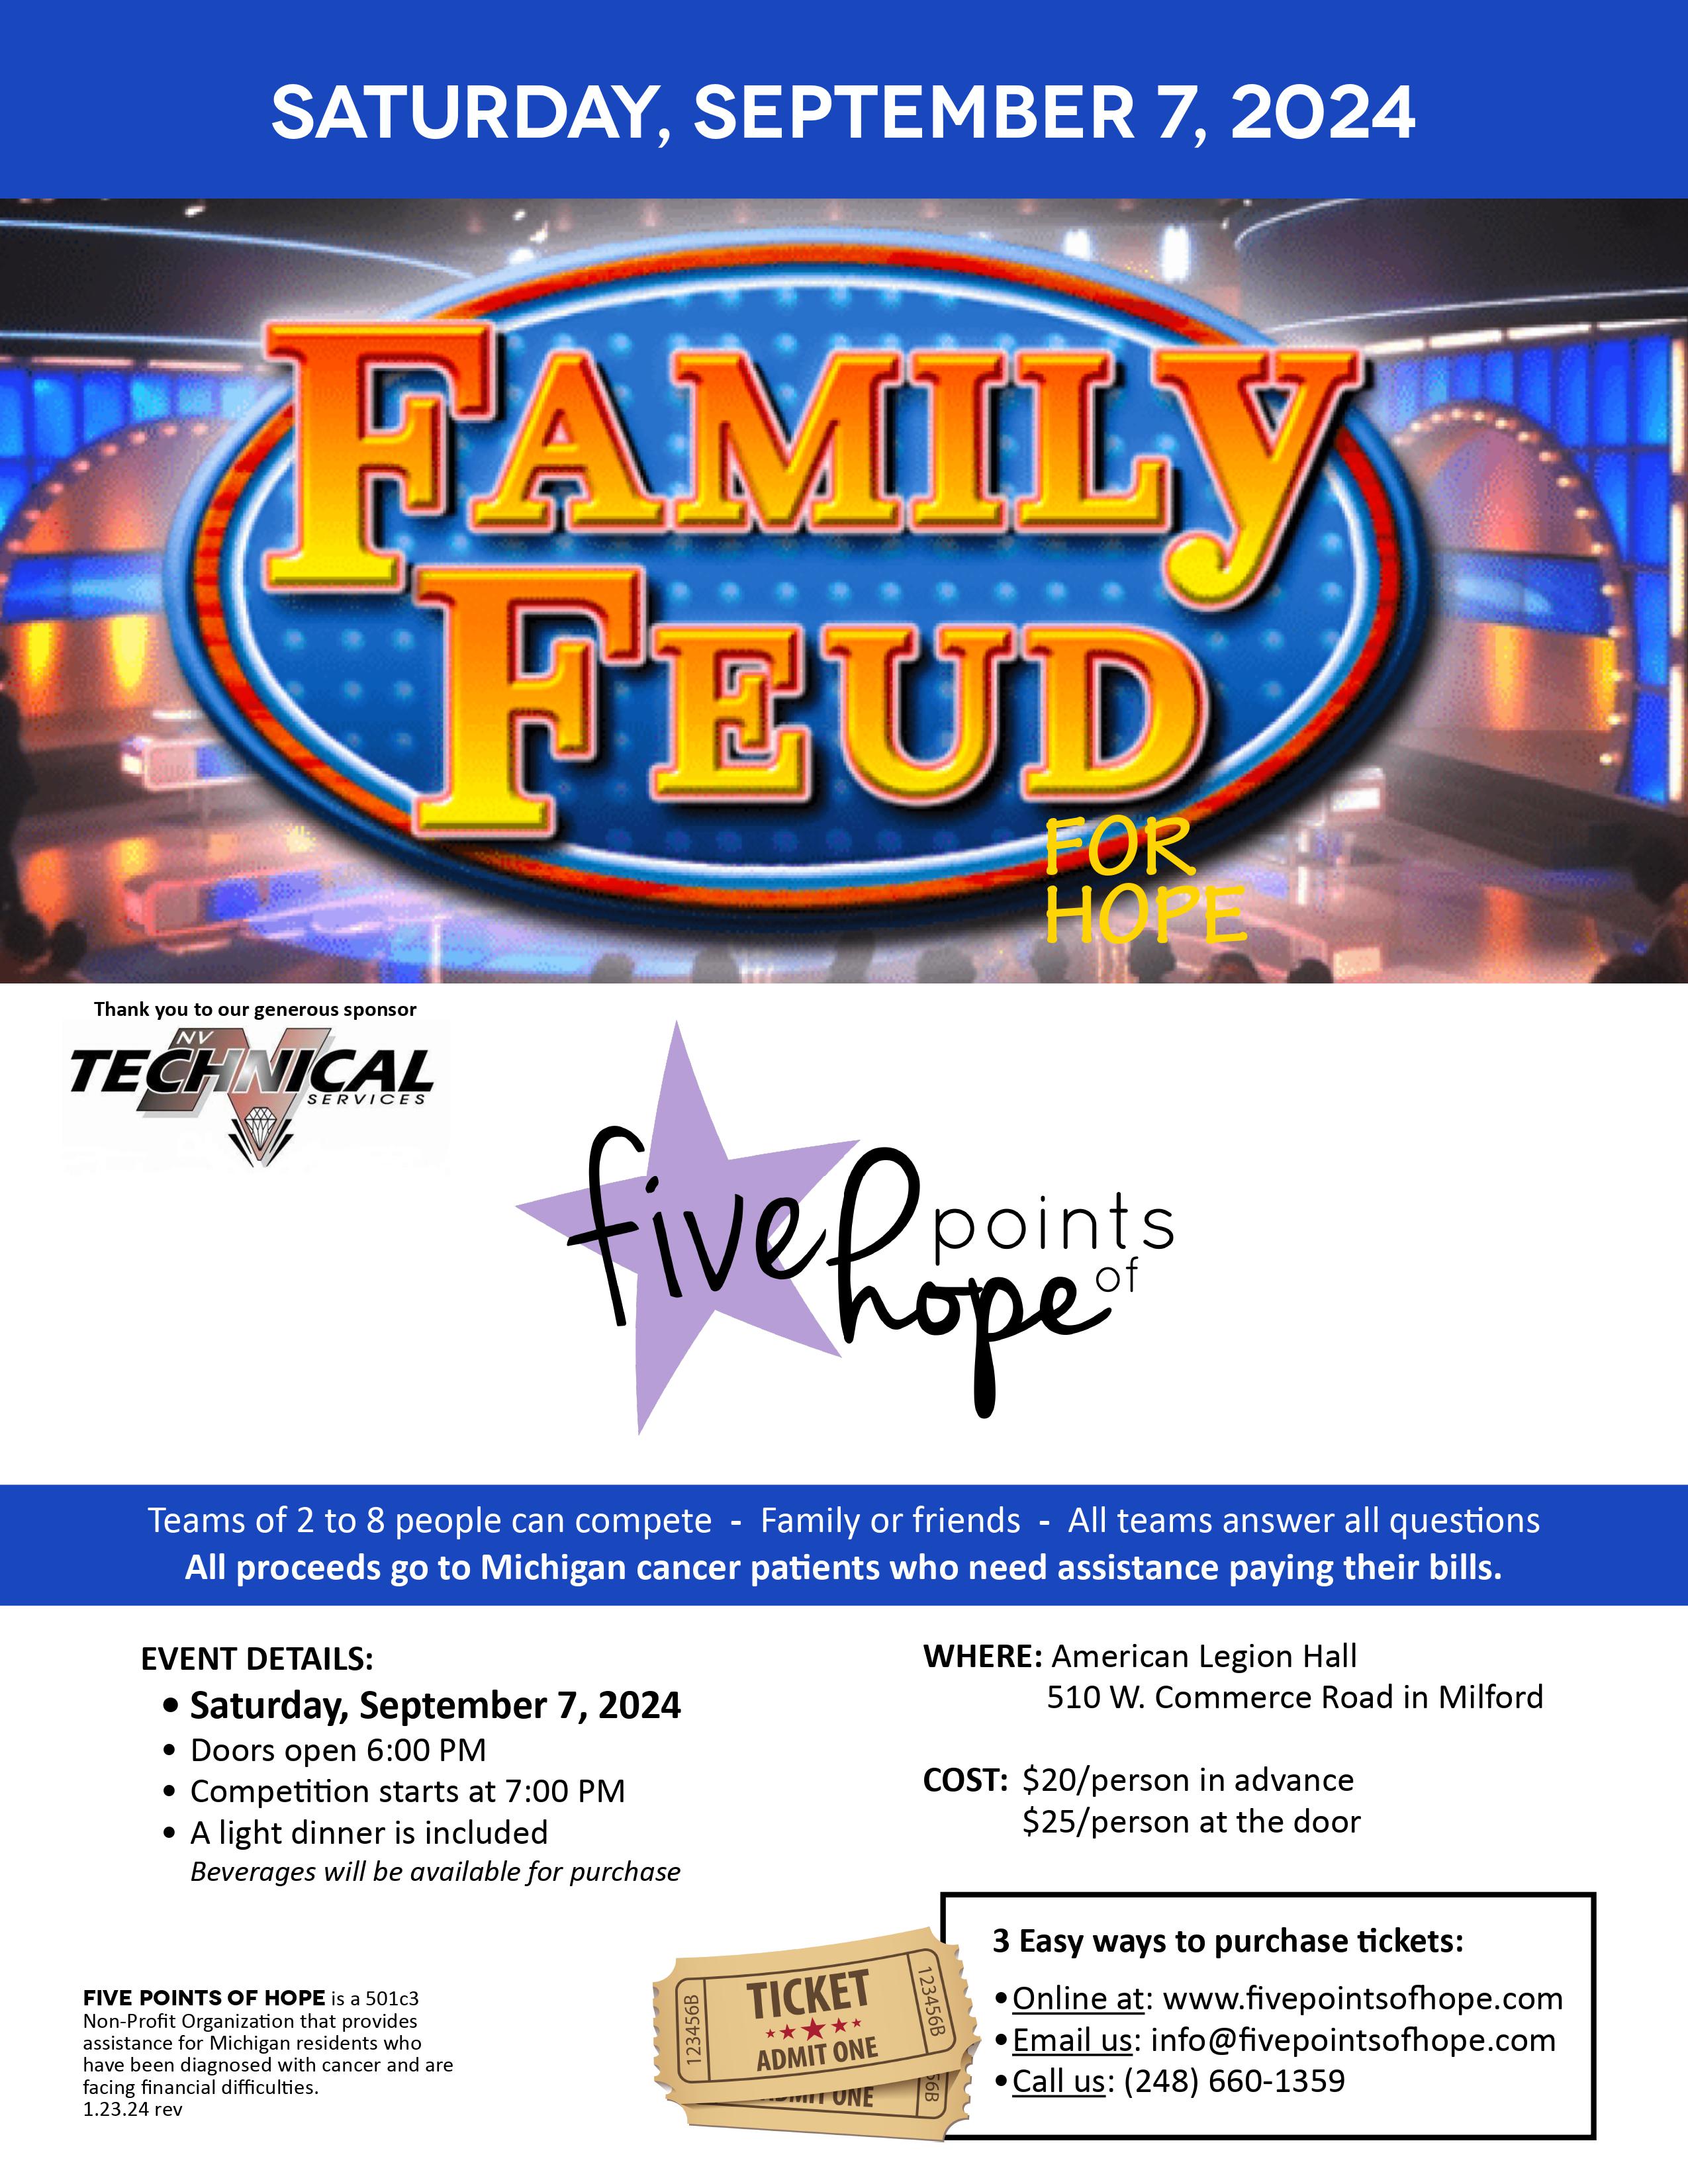 Family Feud FPOH 2024